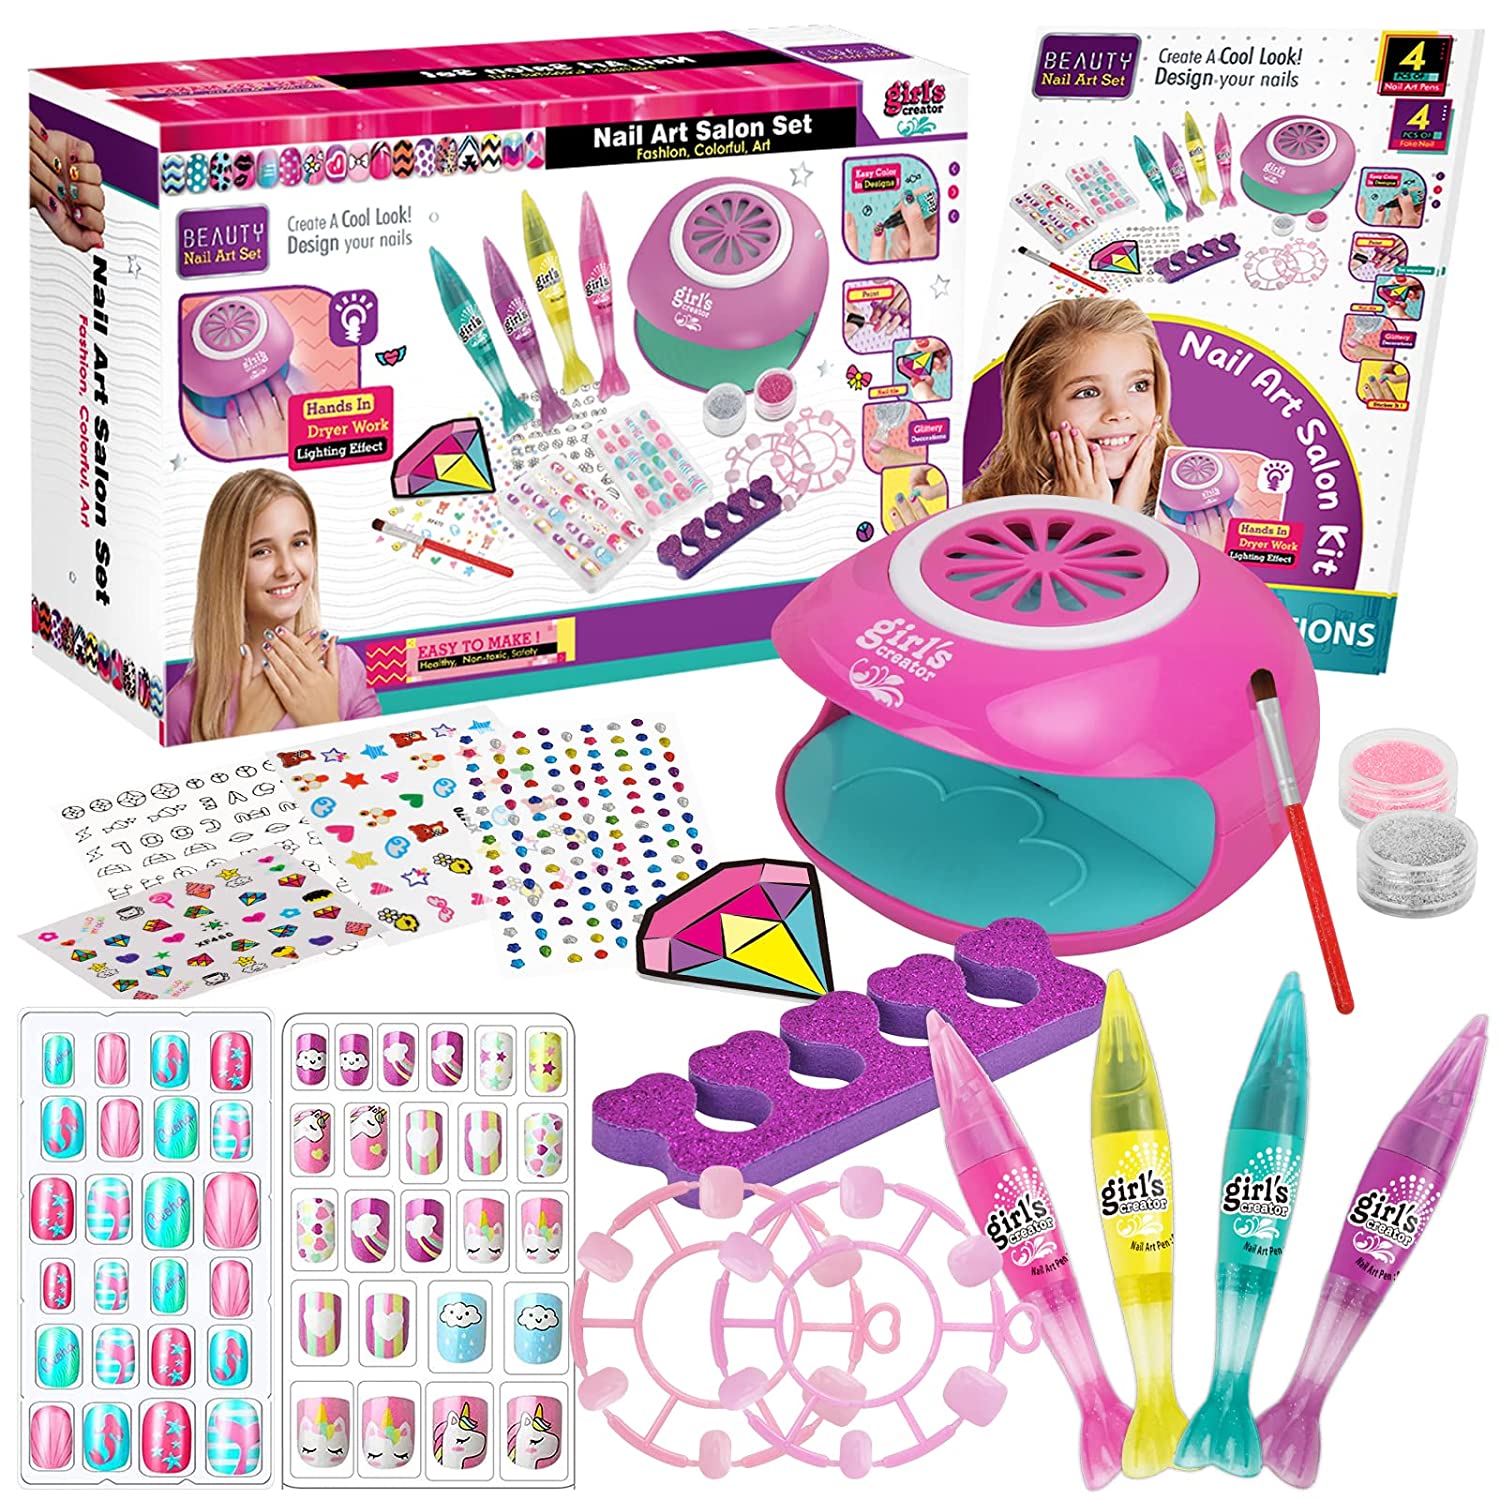 Kids Nail Polish Set for Girls, FunKidz Nail Art Kit for Kids with 3 in 1 Nail Polish Pens Glitter Sticky Decoration Accessories Combo Kit